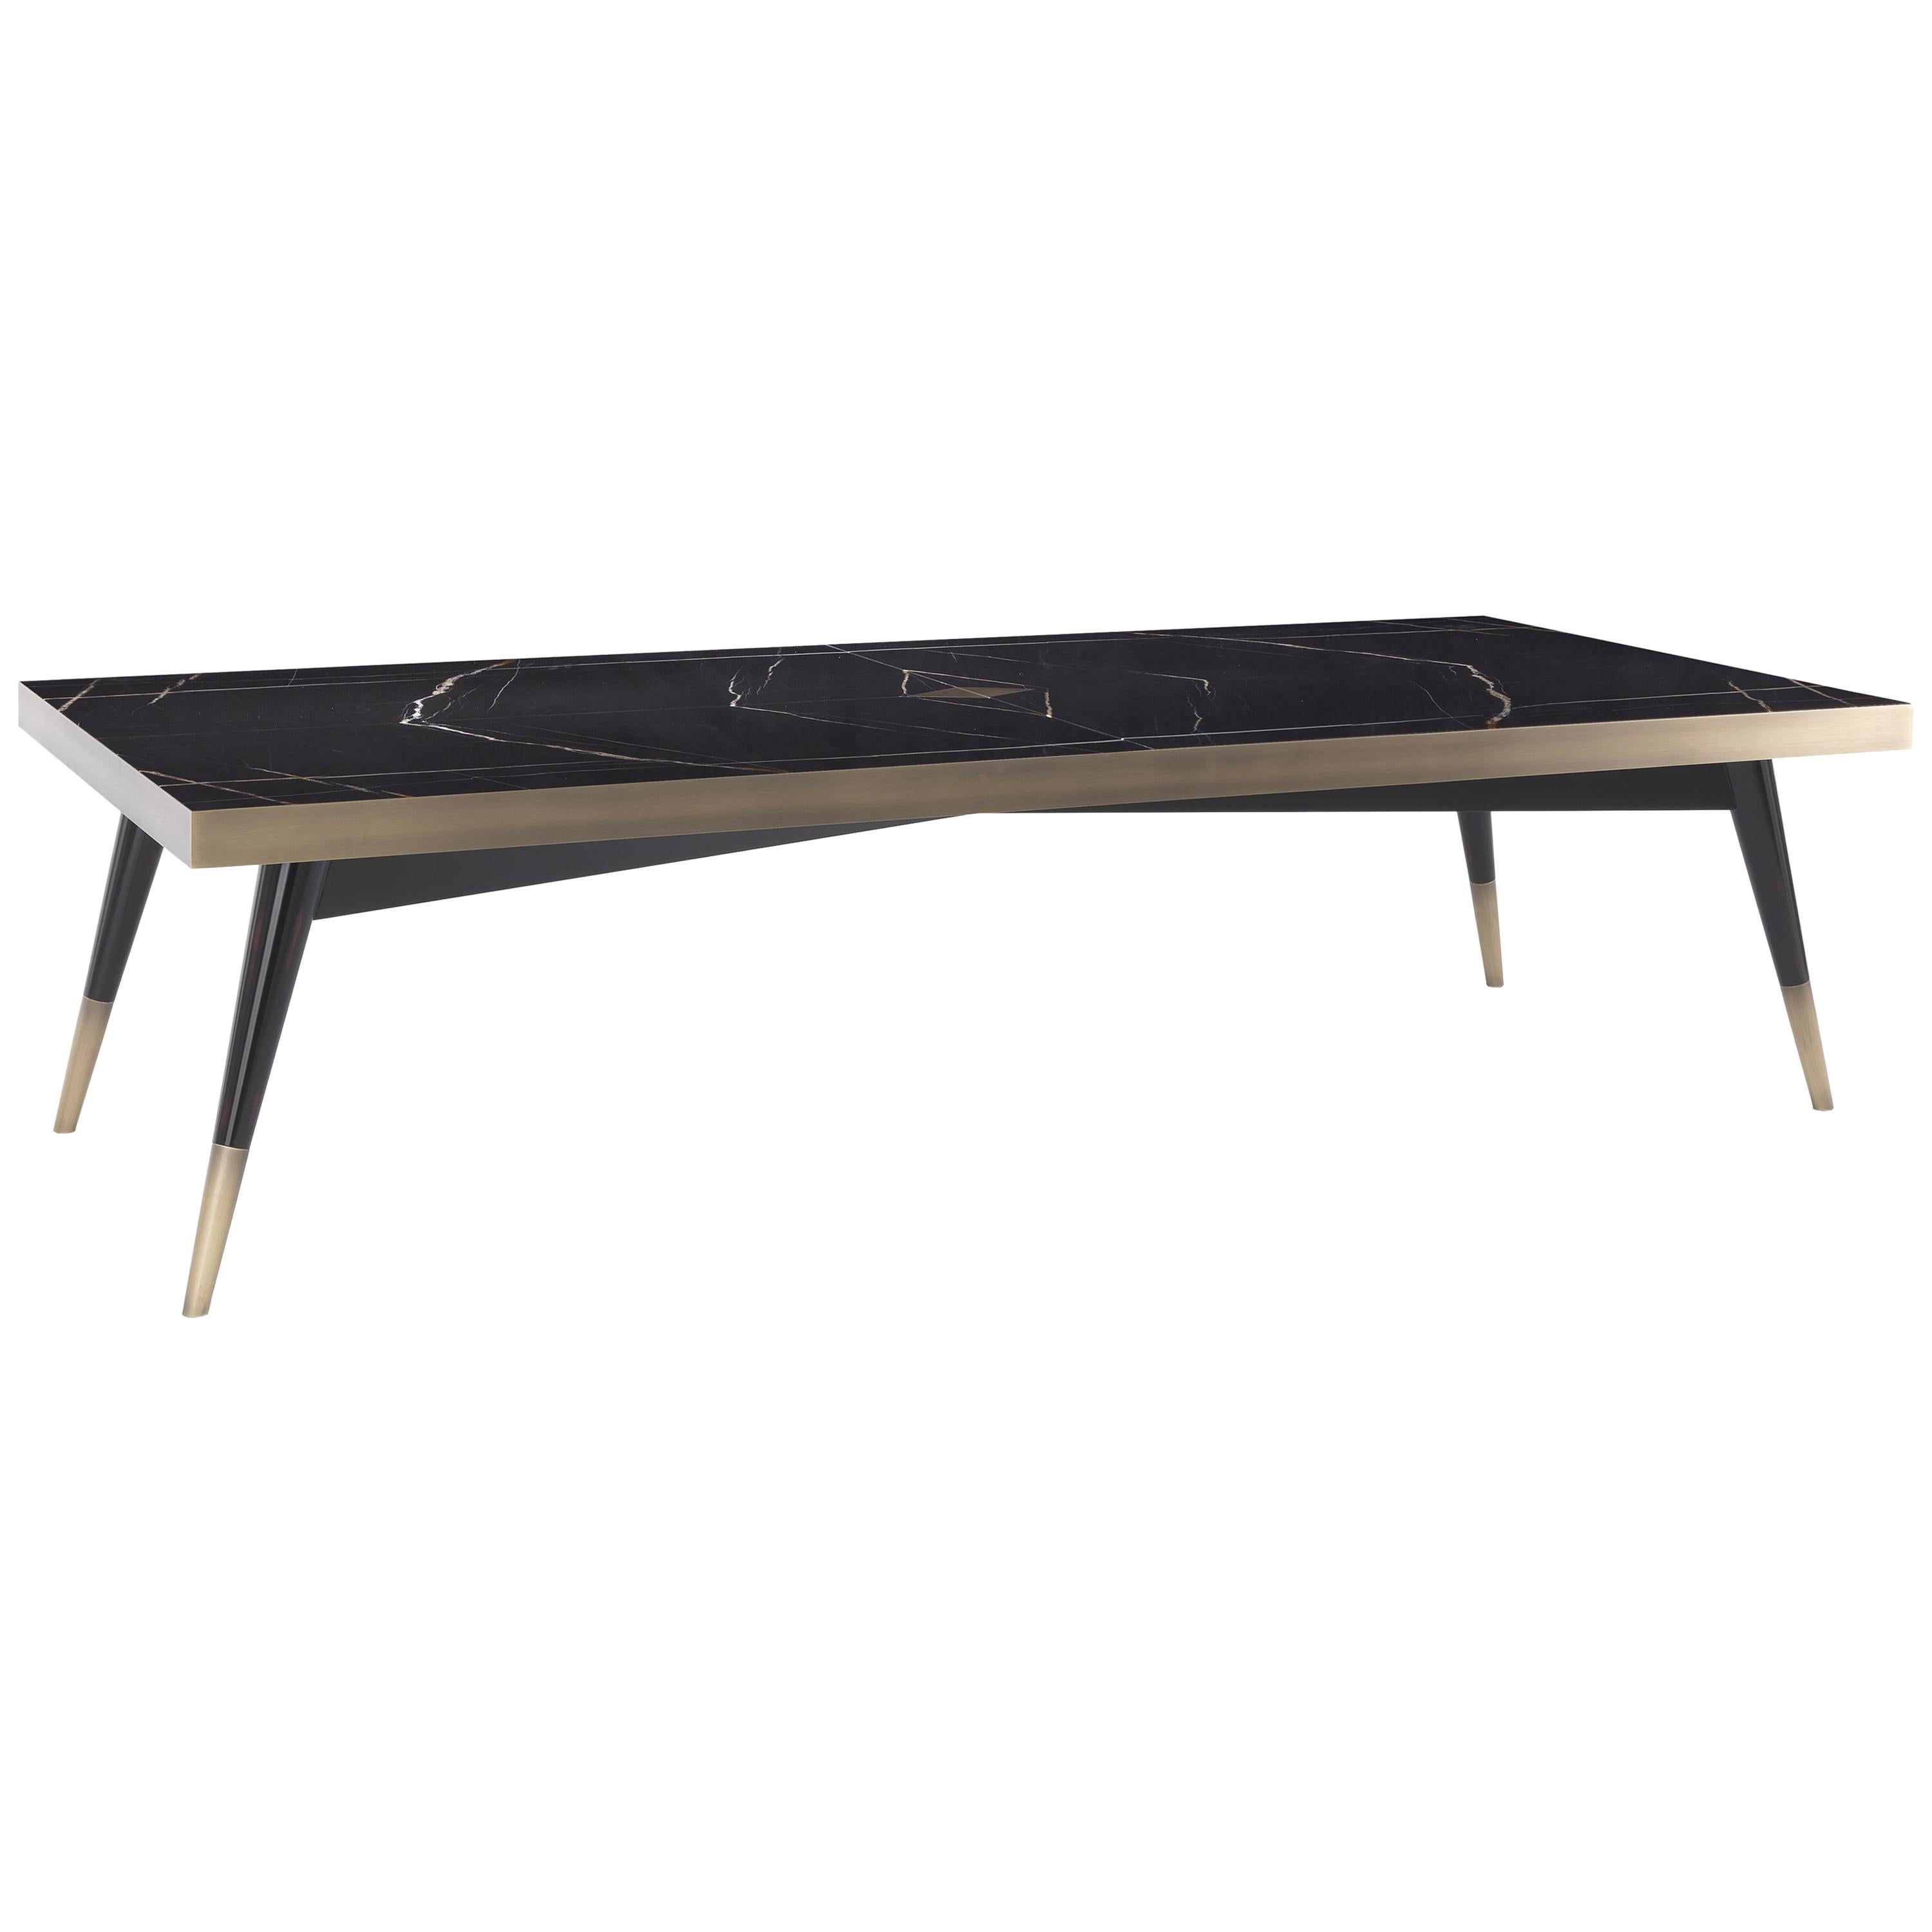 Gianfranco Ferré Mayfair 1 Rectangular Dining Table in Wood with Bronzed Legs For Sale